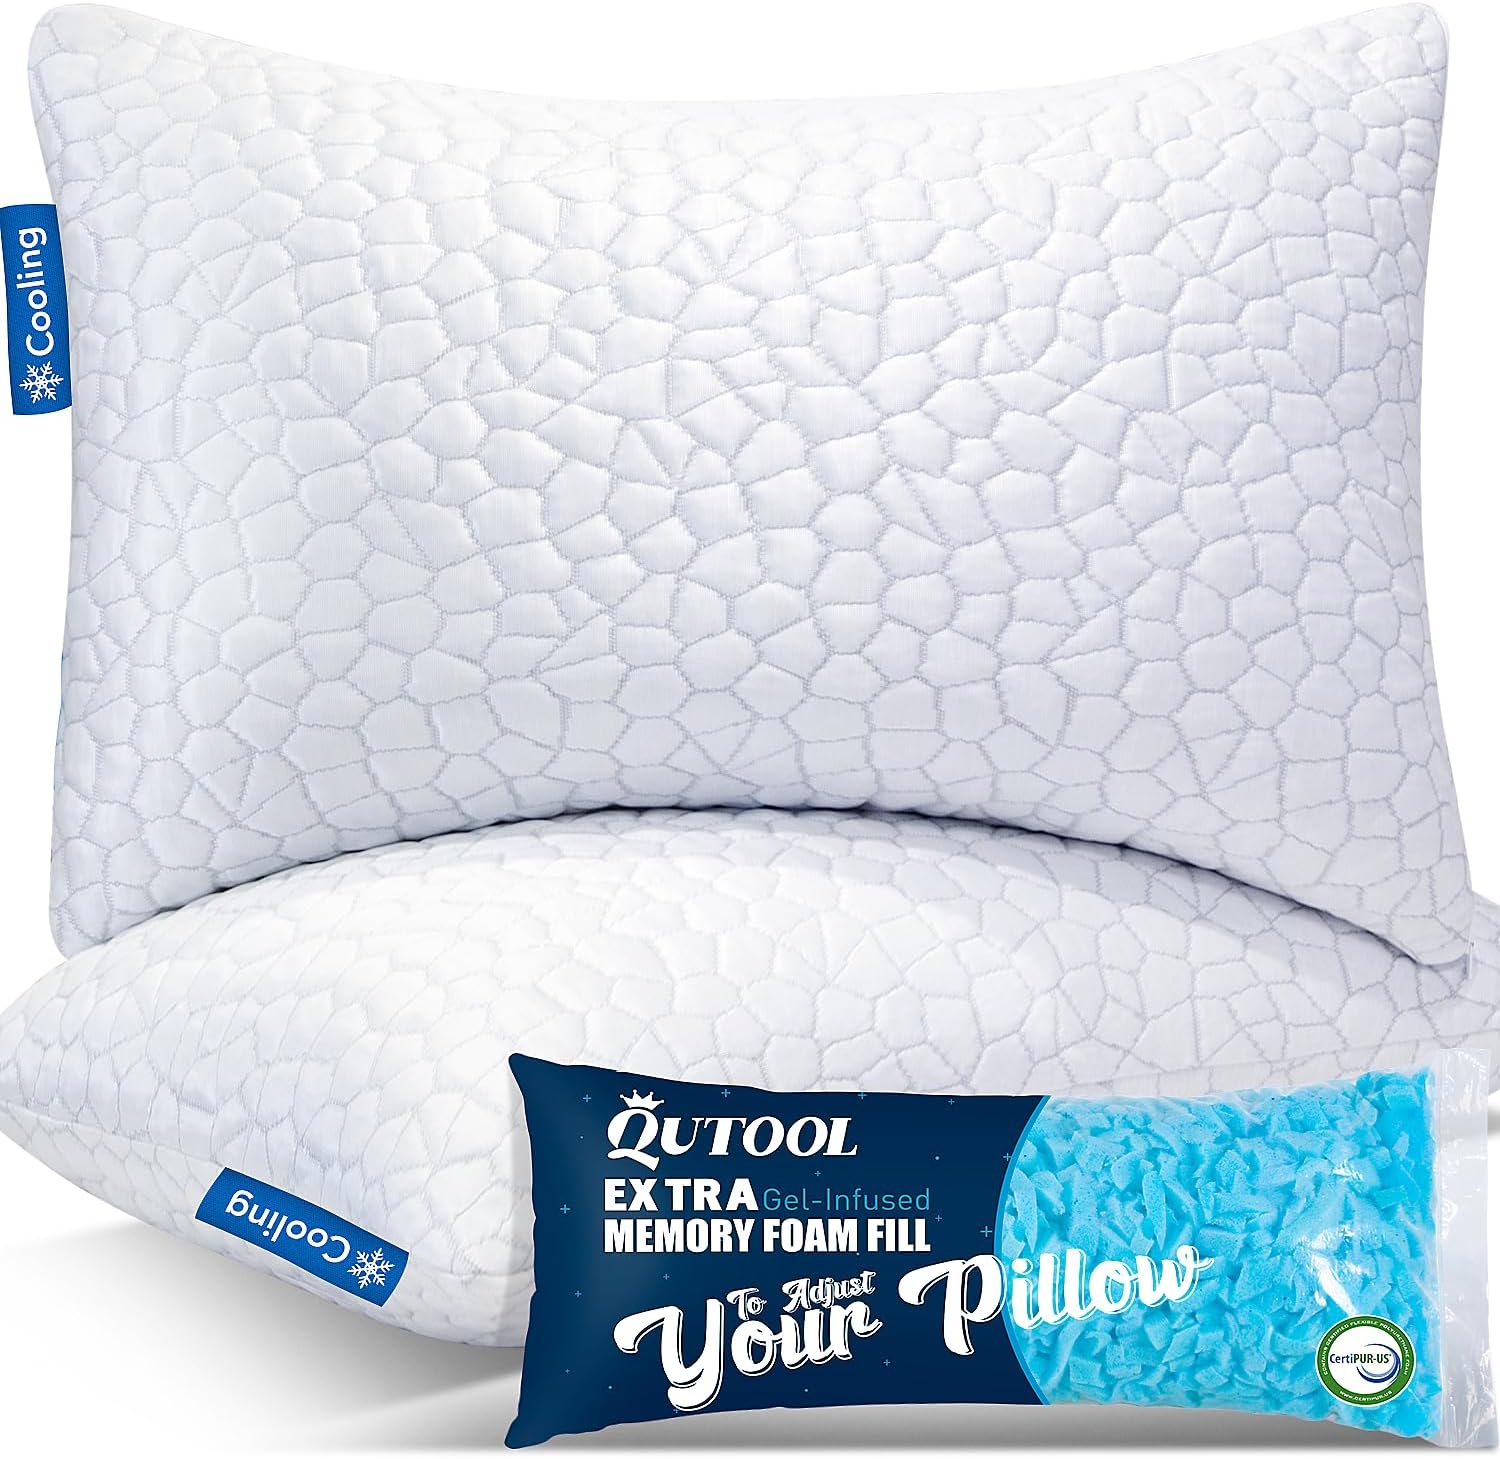 Get the Best Sleep with QUTOOL Cooling Pillows - Limited-Time Discount of 20%!